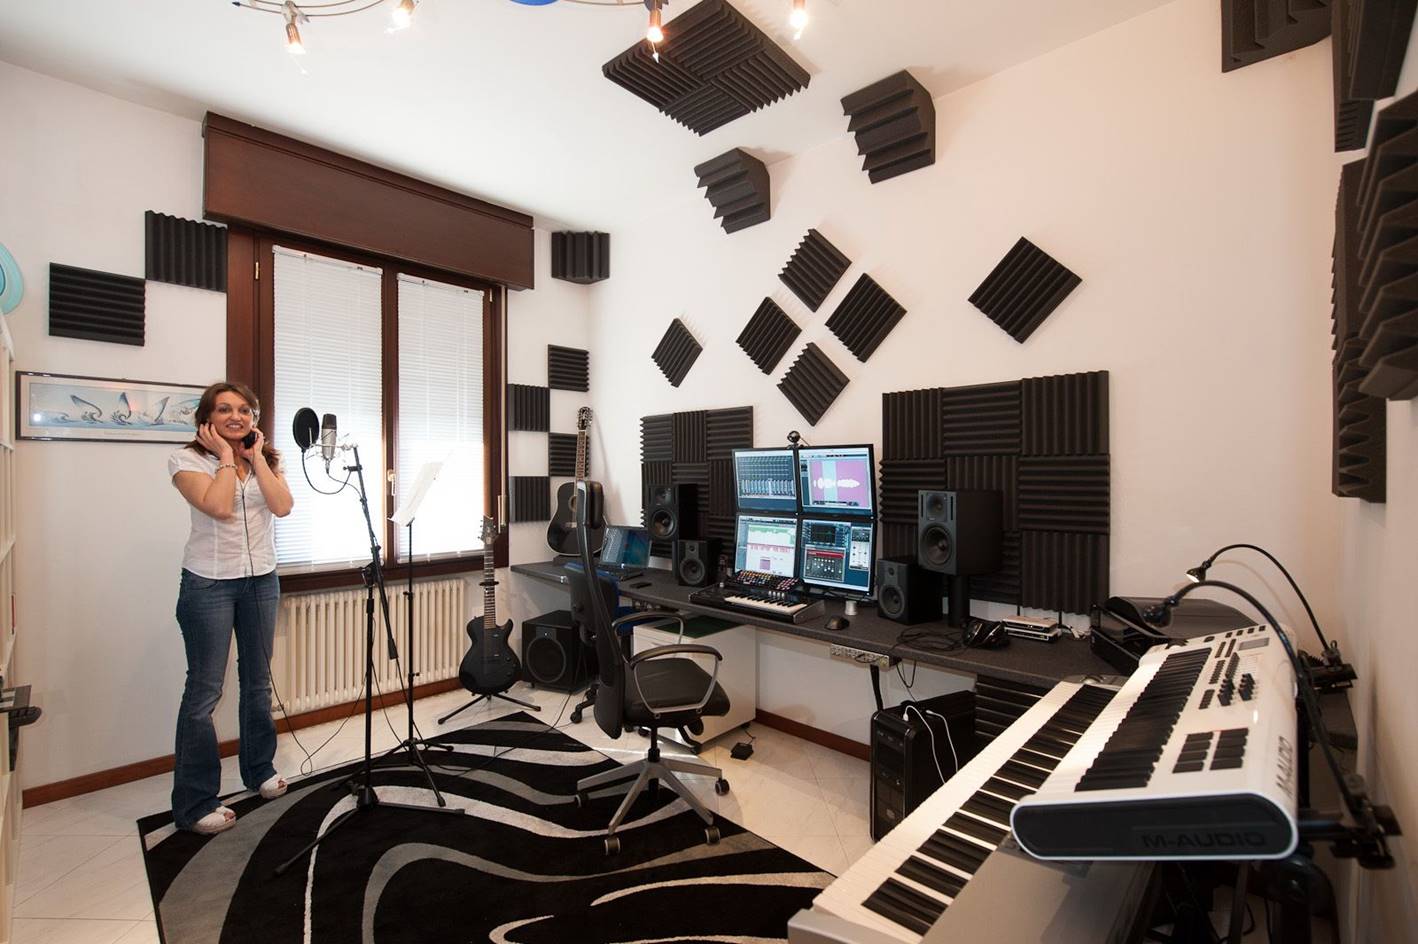 How to Make DIY Acoustic Panels for Your Studio - Produce Like A Pro